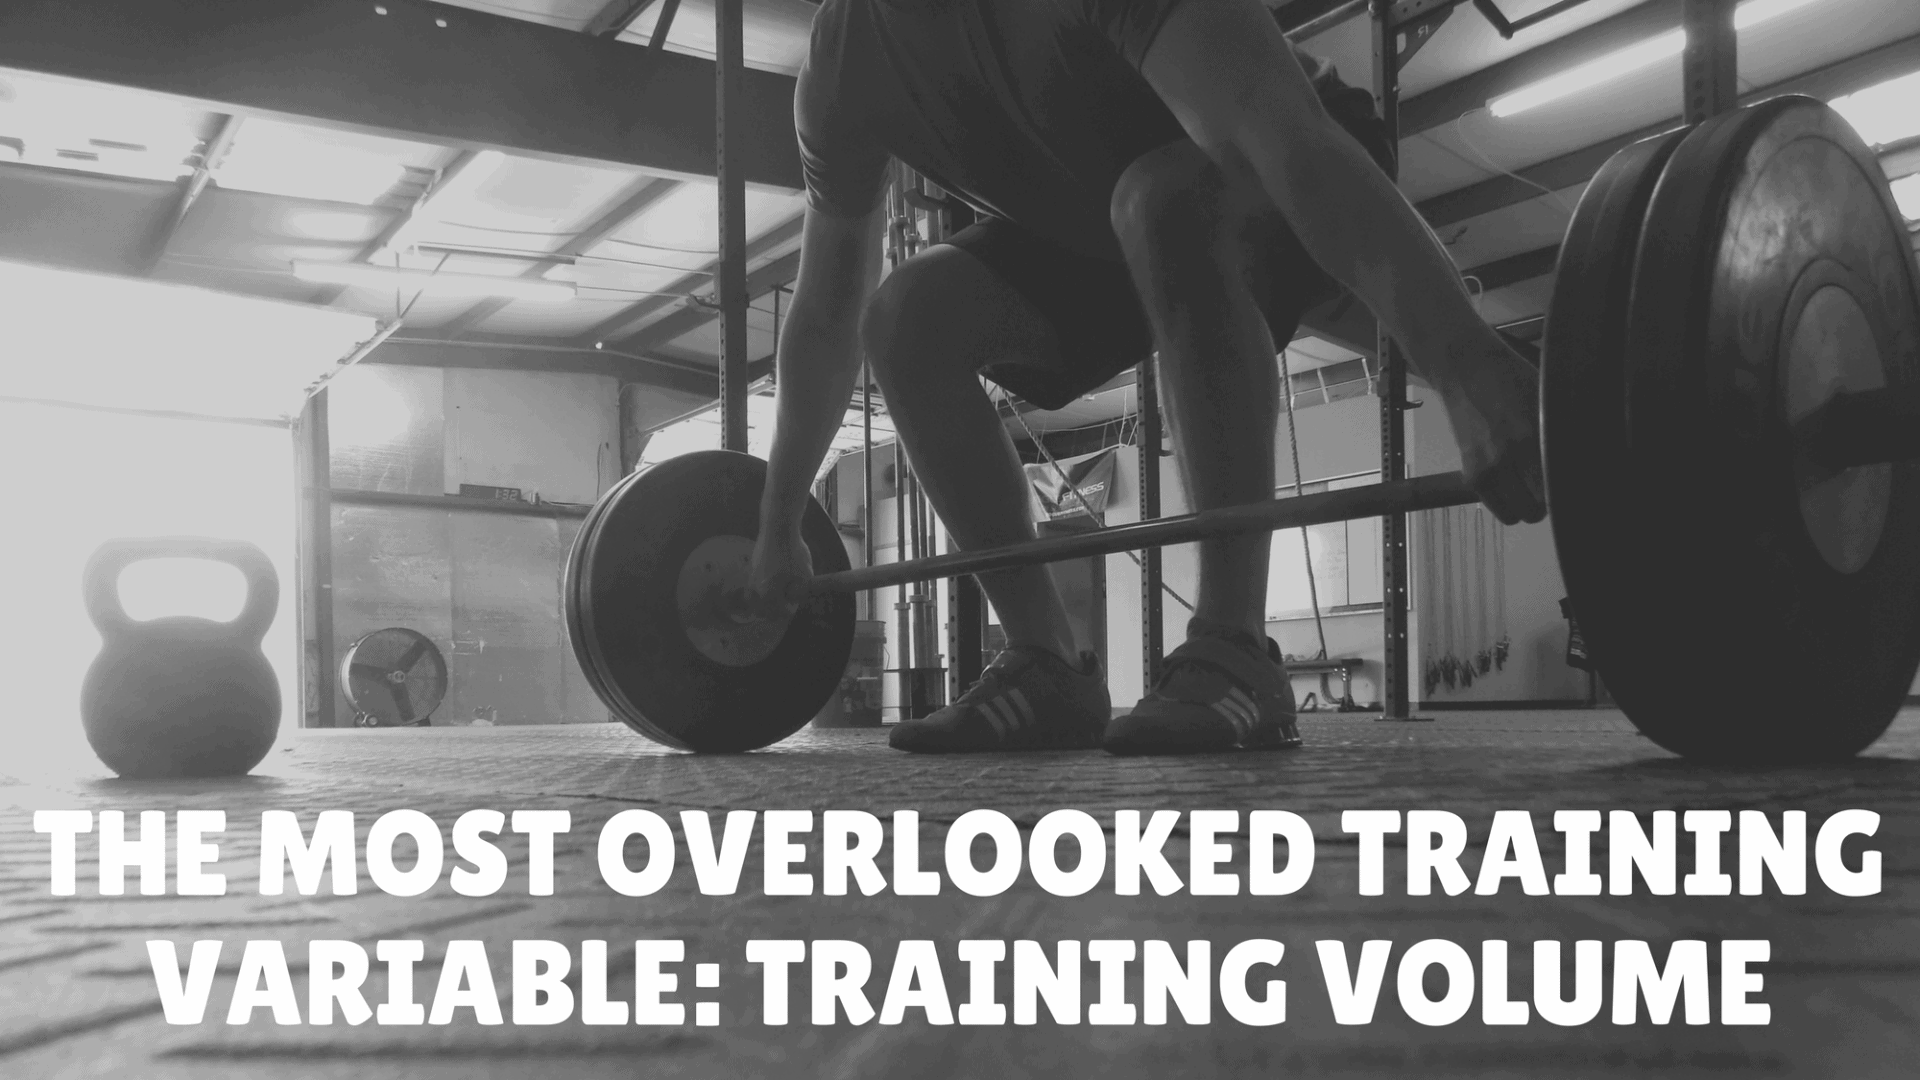 Featured image for “The Most Overlooked Training Variable: Training Volume”